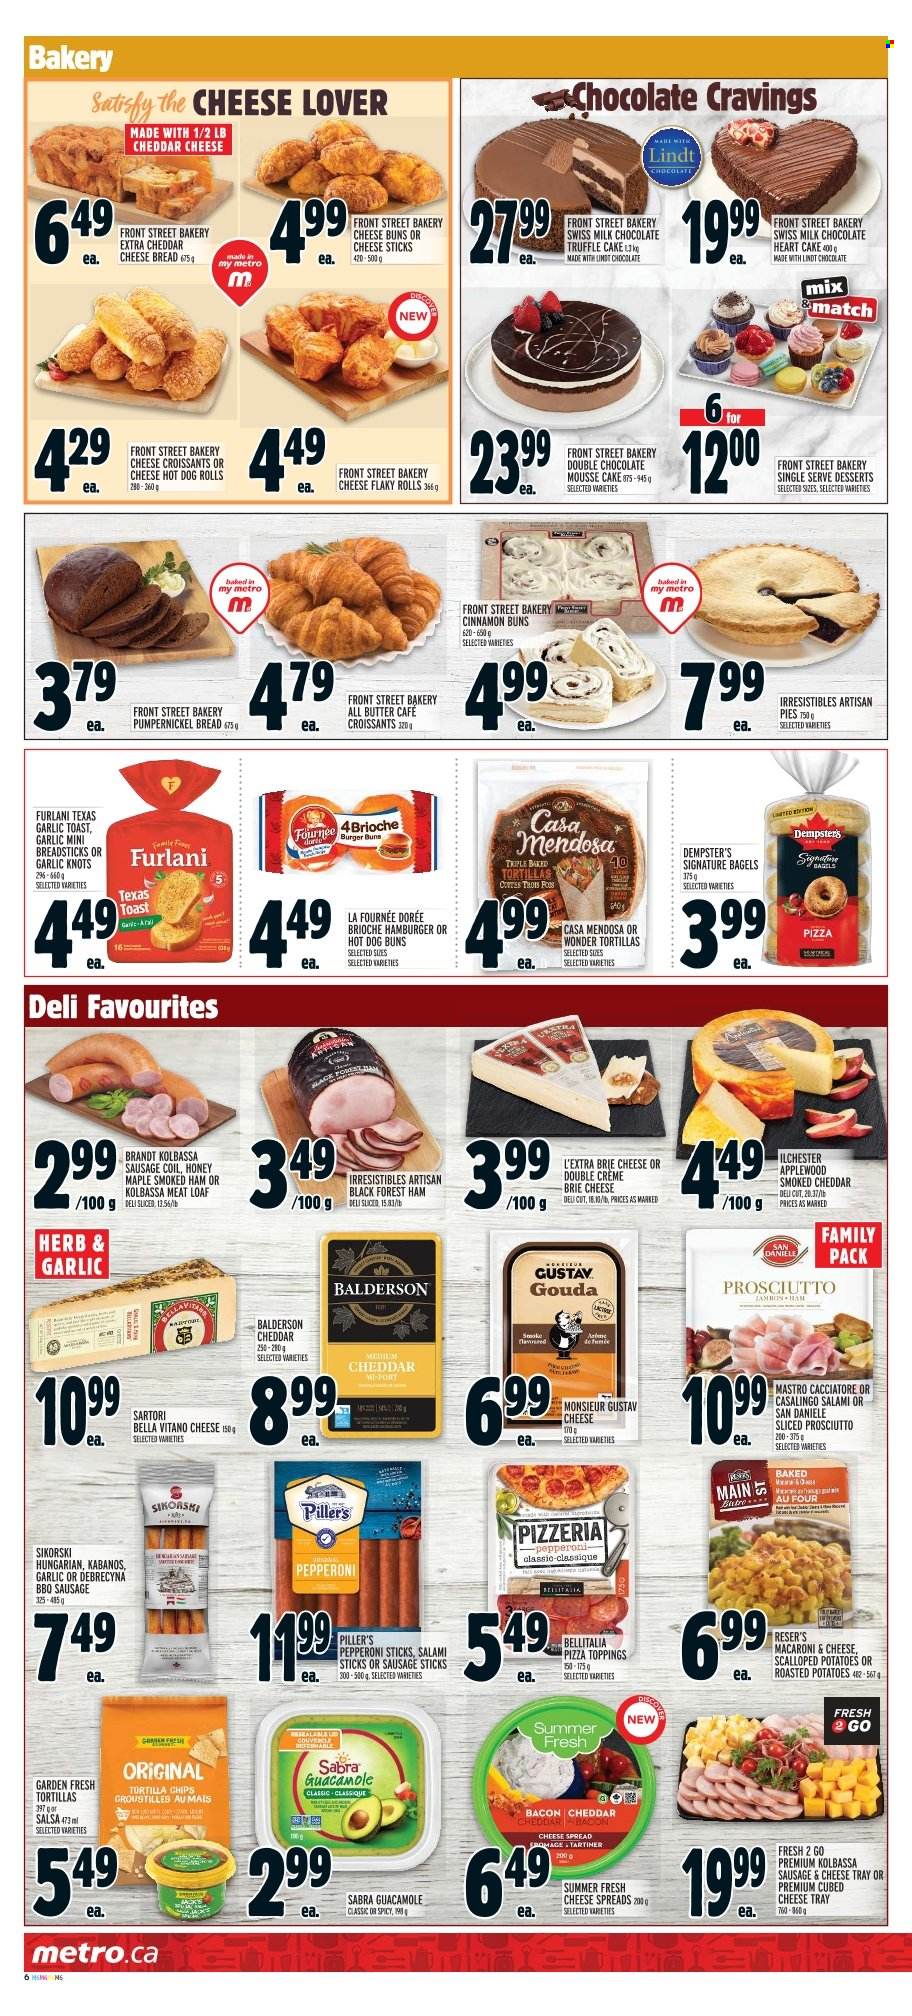 thumbnail - Metro Flyer - February 09, 2023 - February 15, 2023 - Sales products - bagels, bread, hot dog rolls, cake, croissant, buns, brioche, macaroni & cheese, pizza, bacon, salami, ham, prosciutto, smoked ham, sausage, pepperoni, cheese spread, guacamole, gouda, brie, BellaVitano, cheese sticks, milk chocolate, truffles, bread sticks, tortilla chips, chips, cinnamon, honey, Lindt. Page 9.